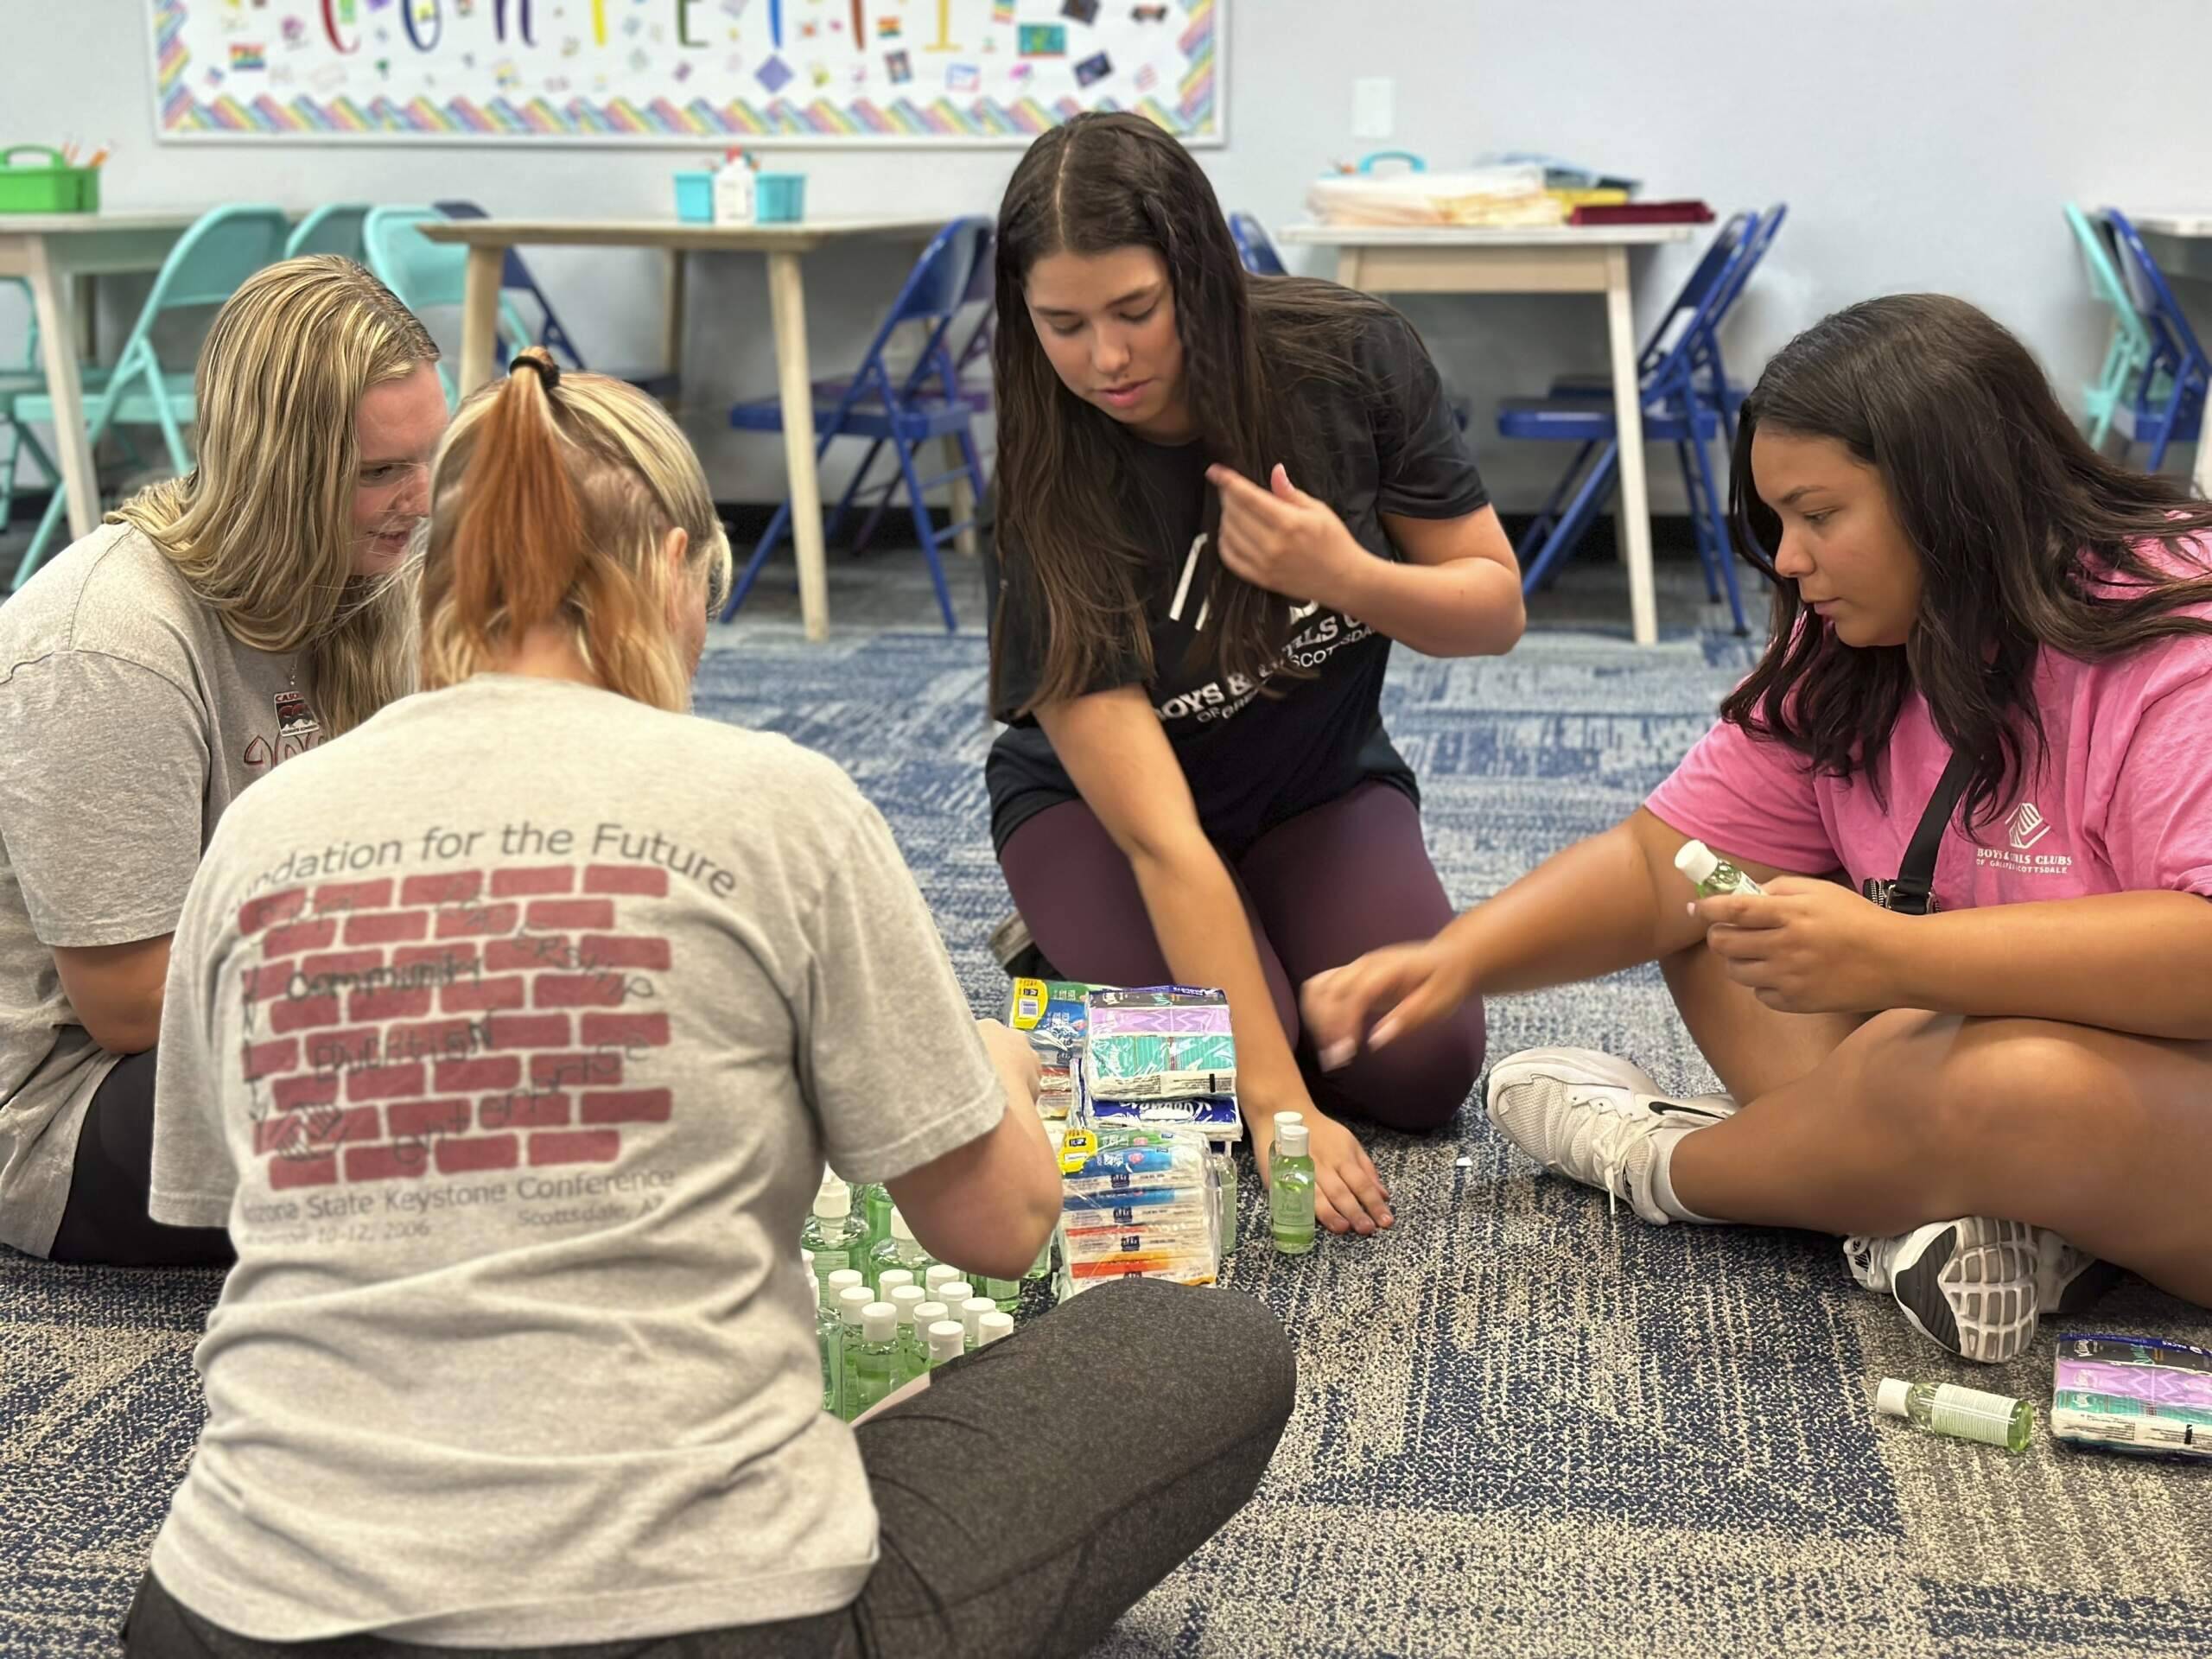 Addison Beer, 17, second from right, and Jaylin Wilson, 18, right, prepares for summer campers arriving next week at the Virginia G. Piper branch of the Boys &amp; Girls Club where she works, Thursday, May, 25, 2023 in Scottsdale, Ariz. With the job market the tightest in half a century, younger workers are playing a critical role in kicking off the summer tourism season this Memorial Day weekend. (Alina Hartounian/AP)